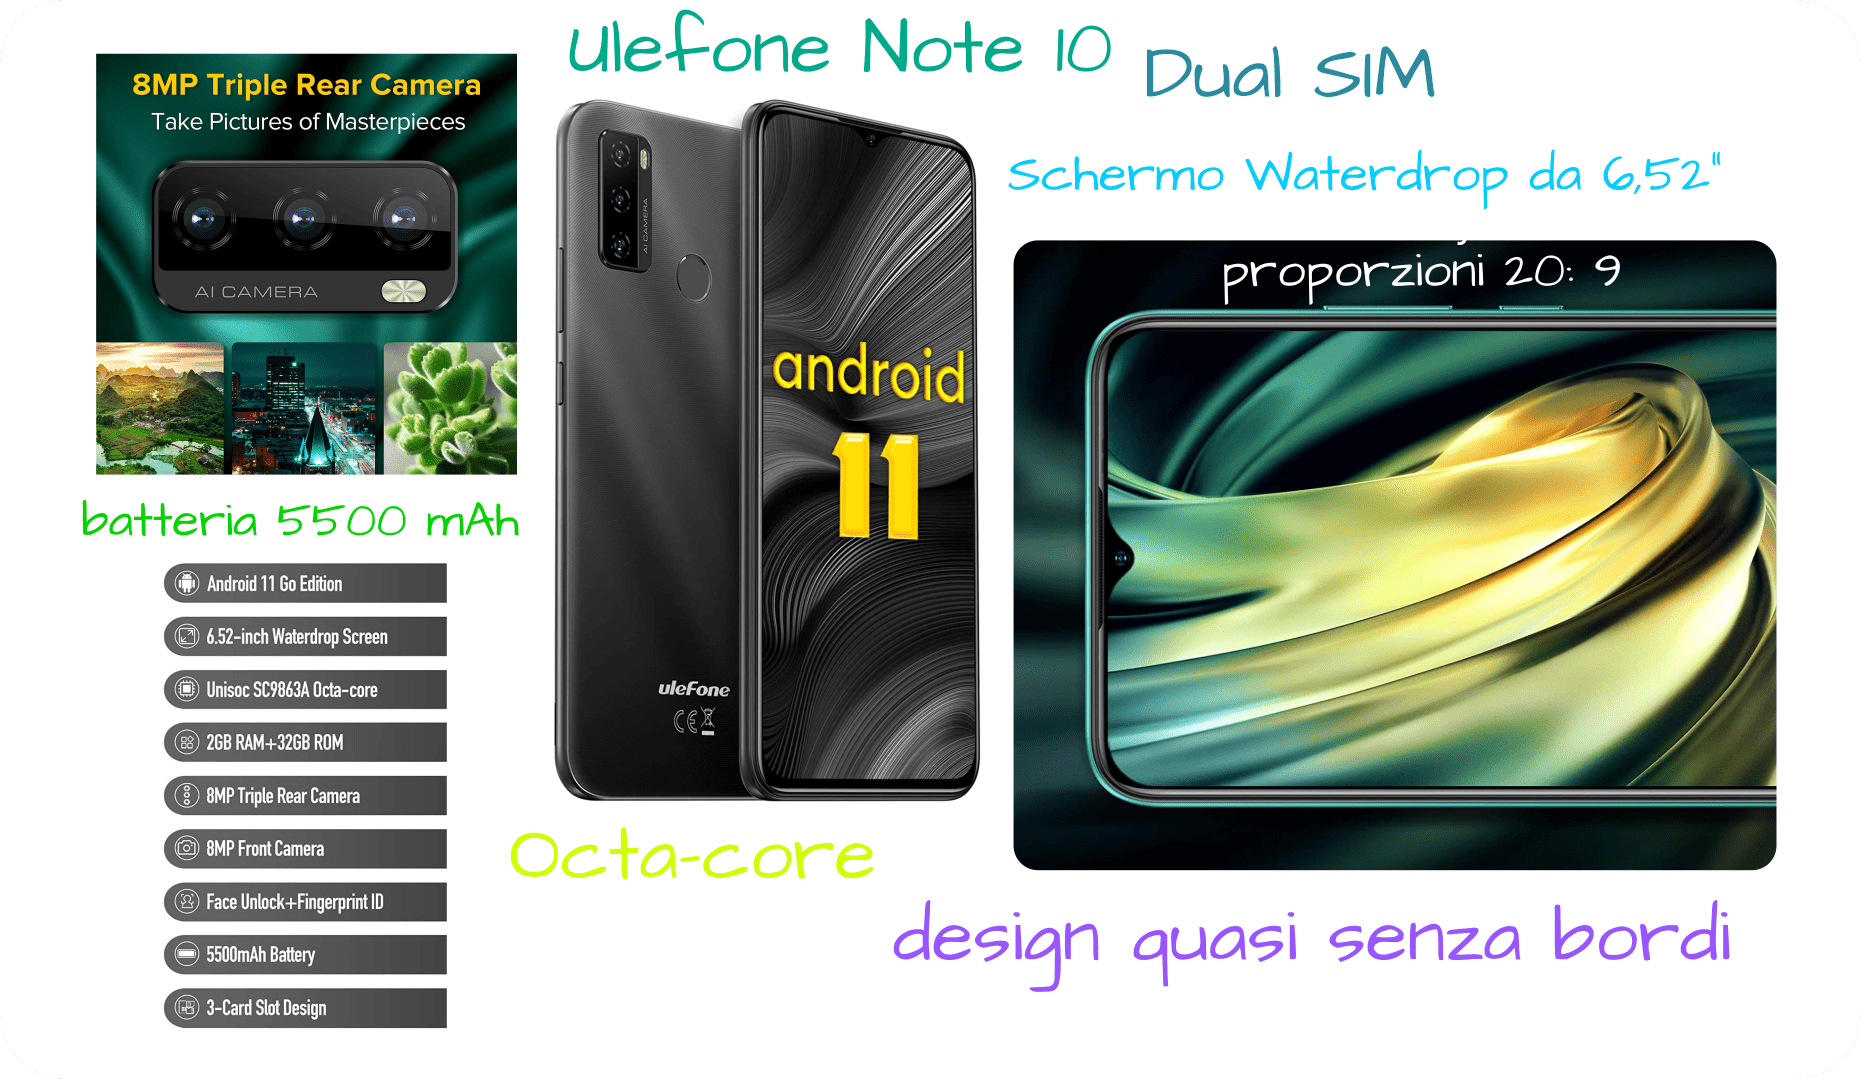 Offerta Smartphone Ulefone Note 10  Android 11 Octa core 1,6 GHz 2021